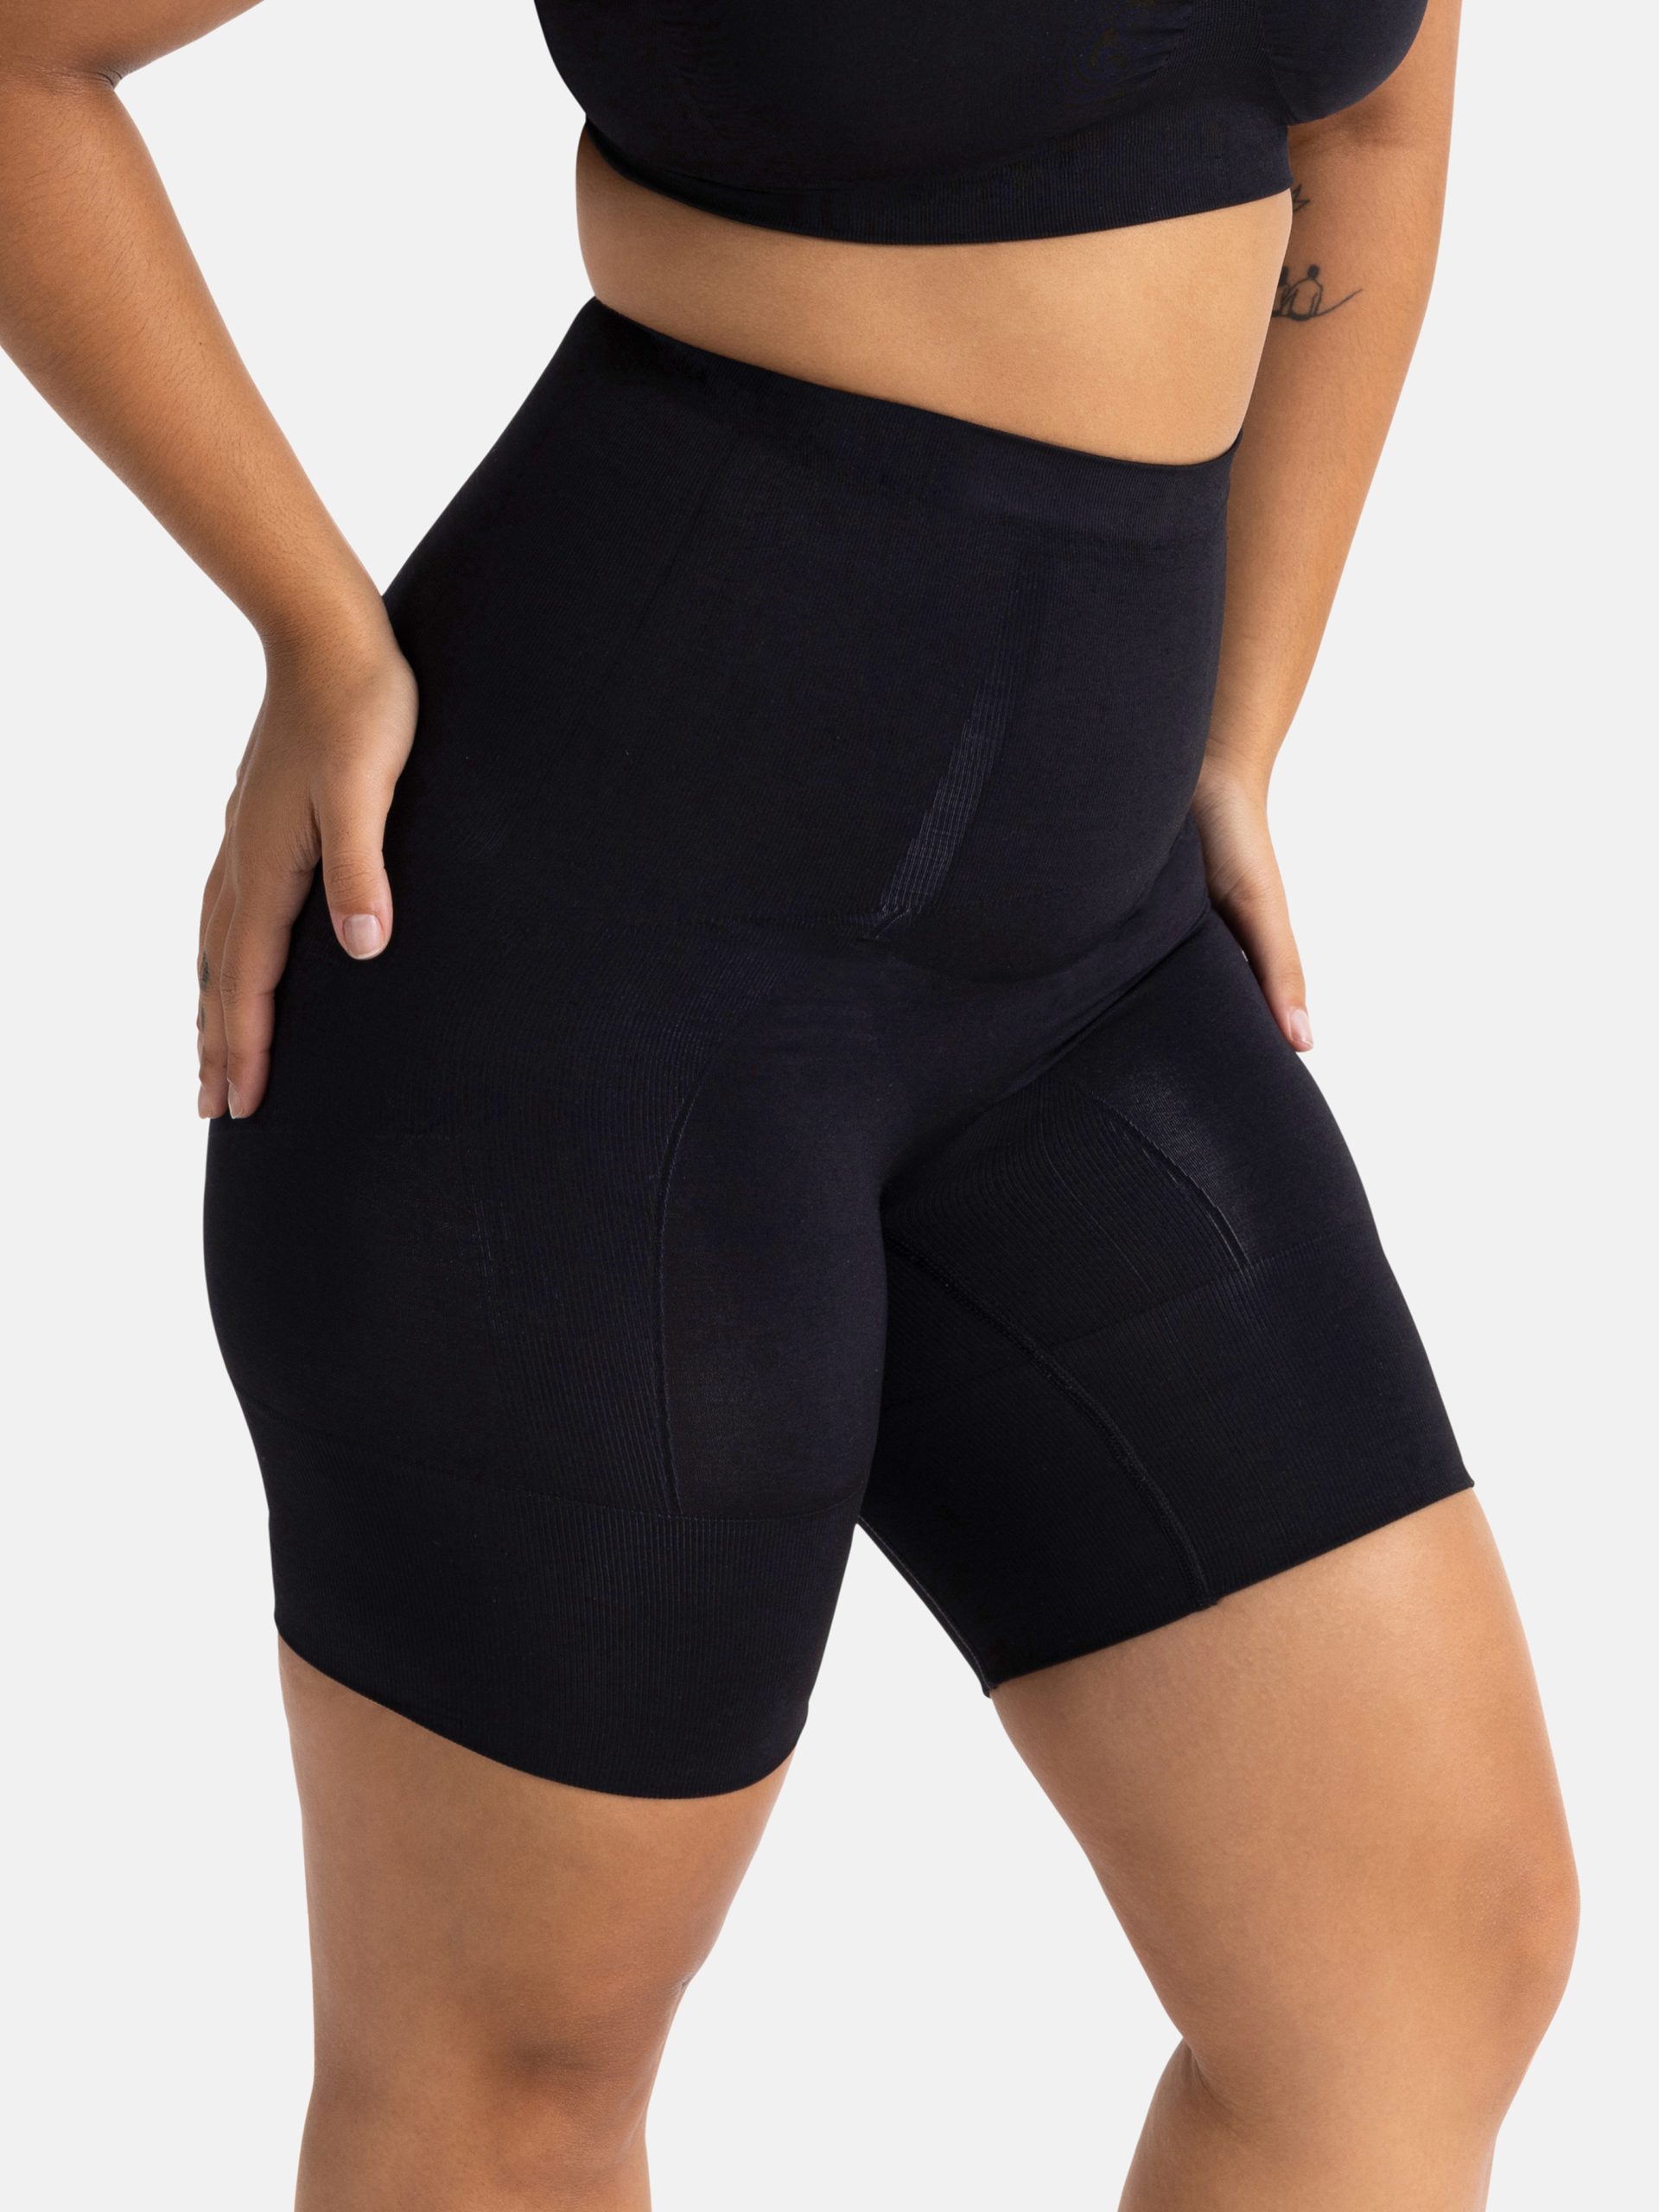 Suprenx High Waisted Tummy Control Shaping Shorts for Women